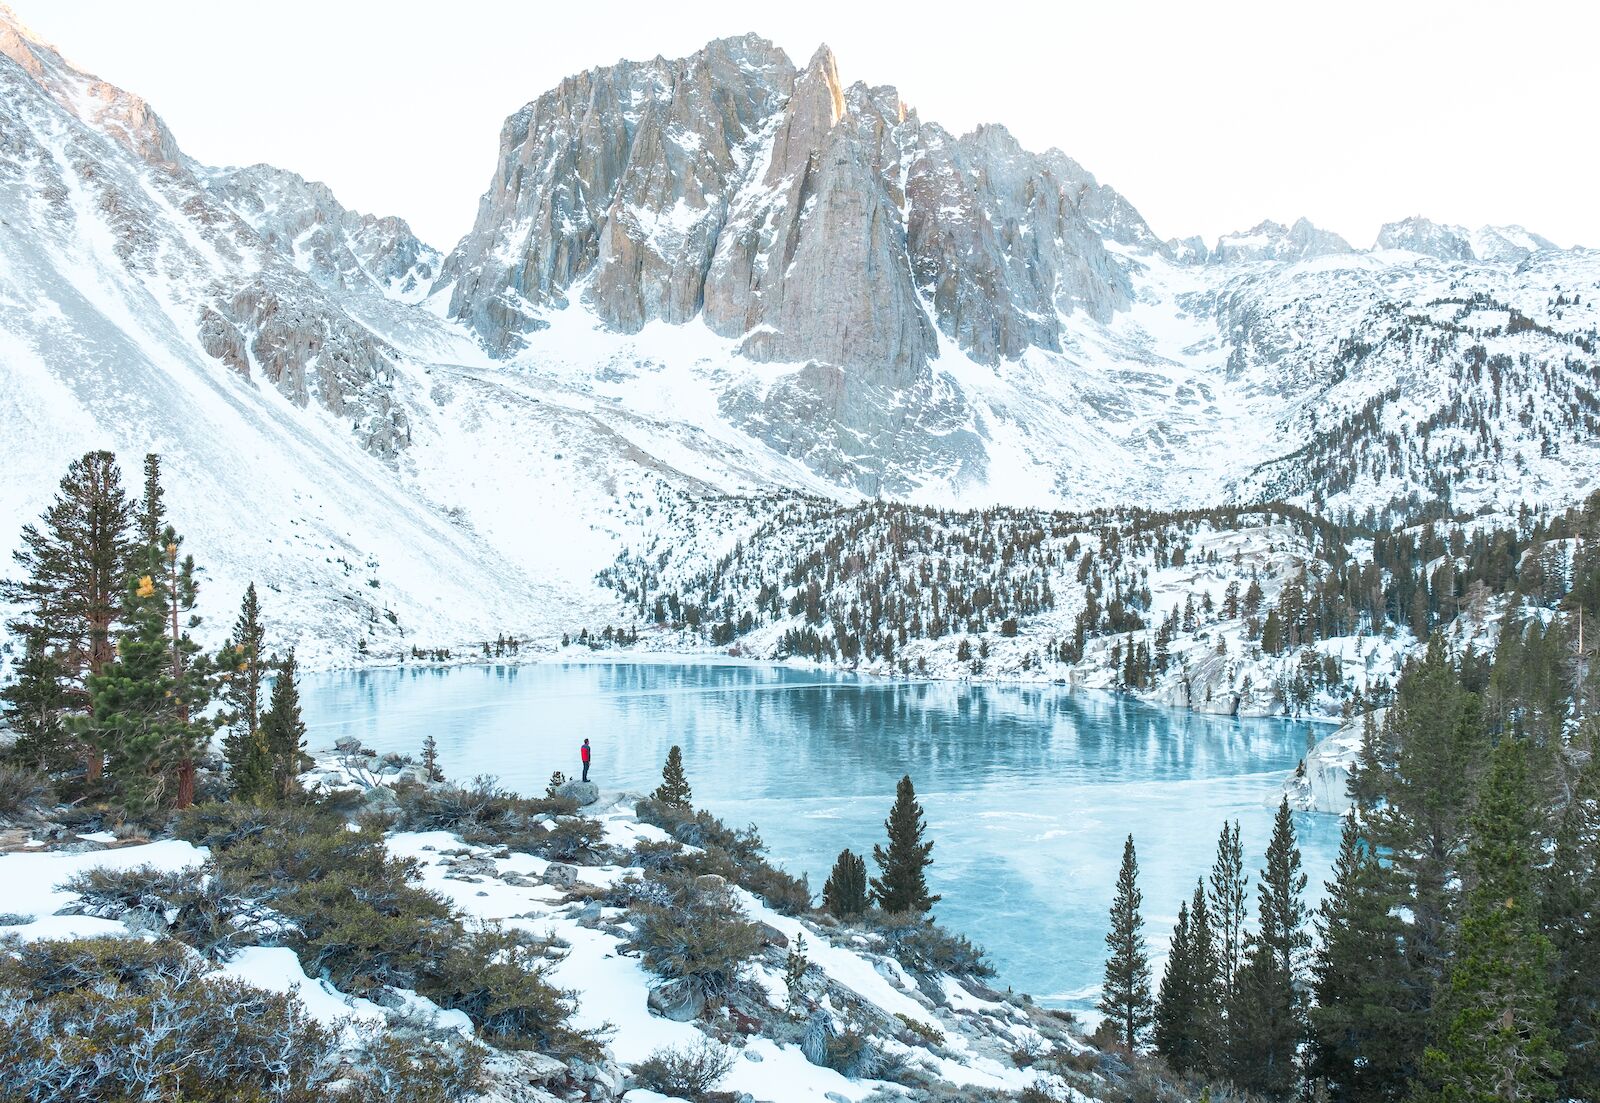 Man looks at a snowy peak bear a beautiful blue lake in the winter in Mammoth Lake California. Mammoth Lake is one of the best destinations for Spring Break 2022.